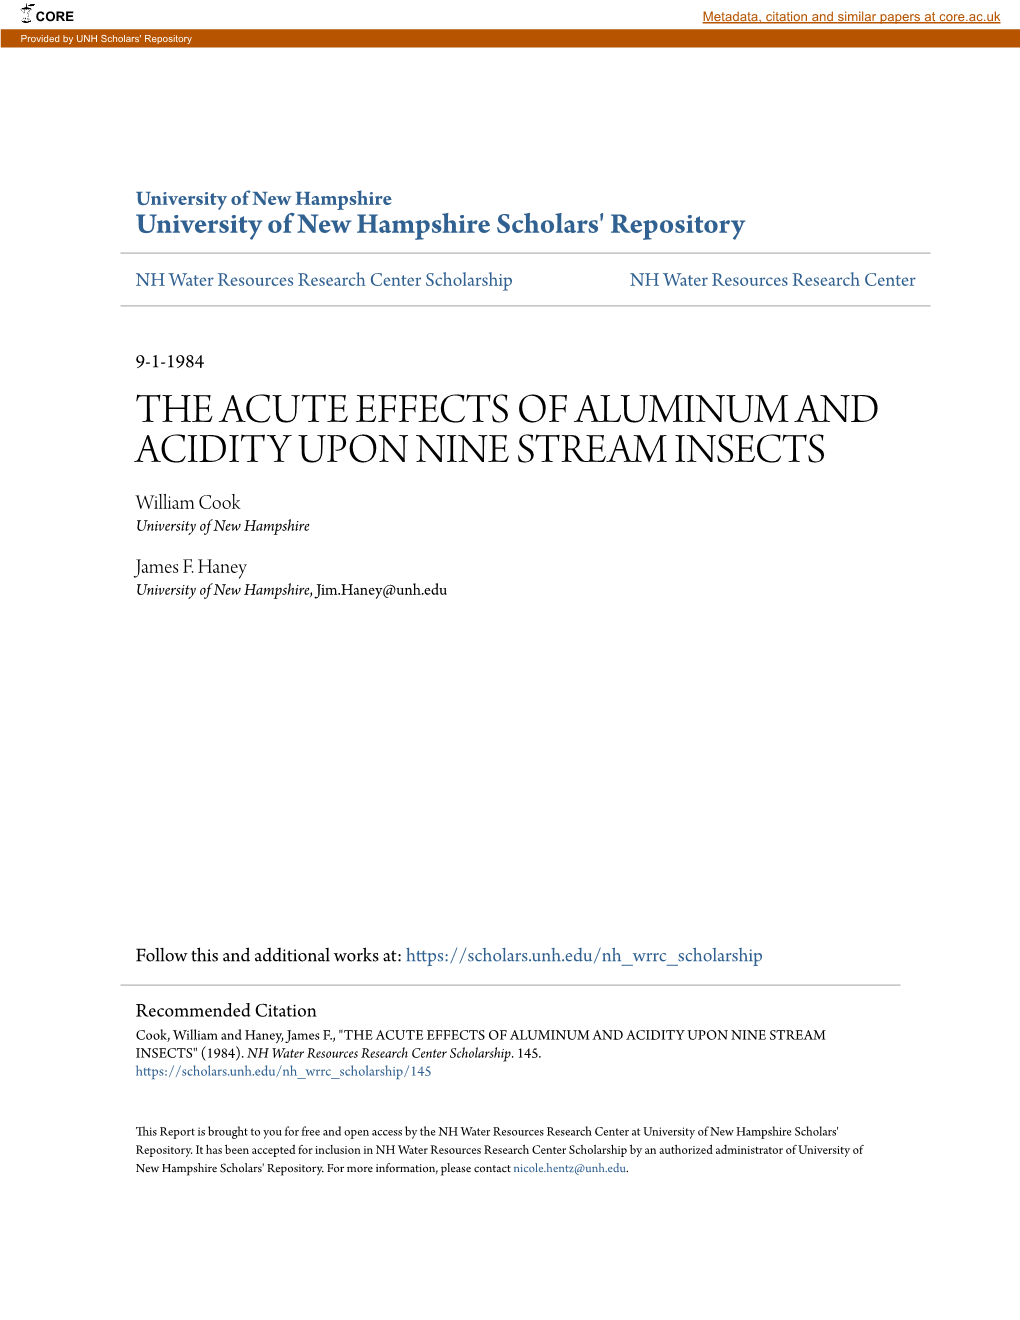 THE ACUTE EFFECTS of ALUMINUM and ACIDITY UPON NINE STREAM INSECTS William Cook University of New Hampshire